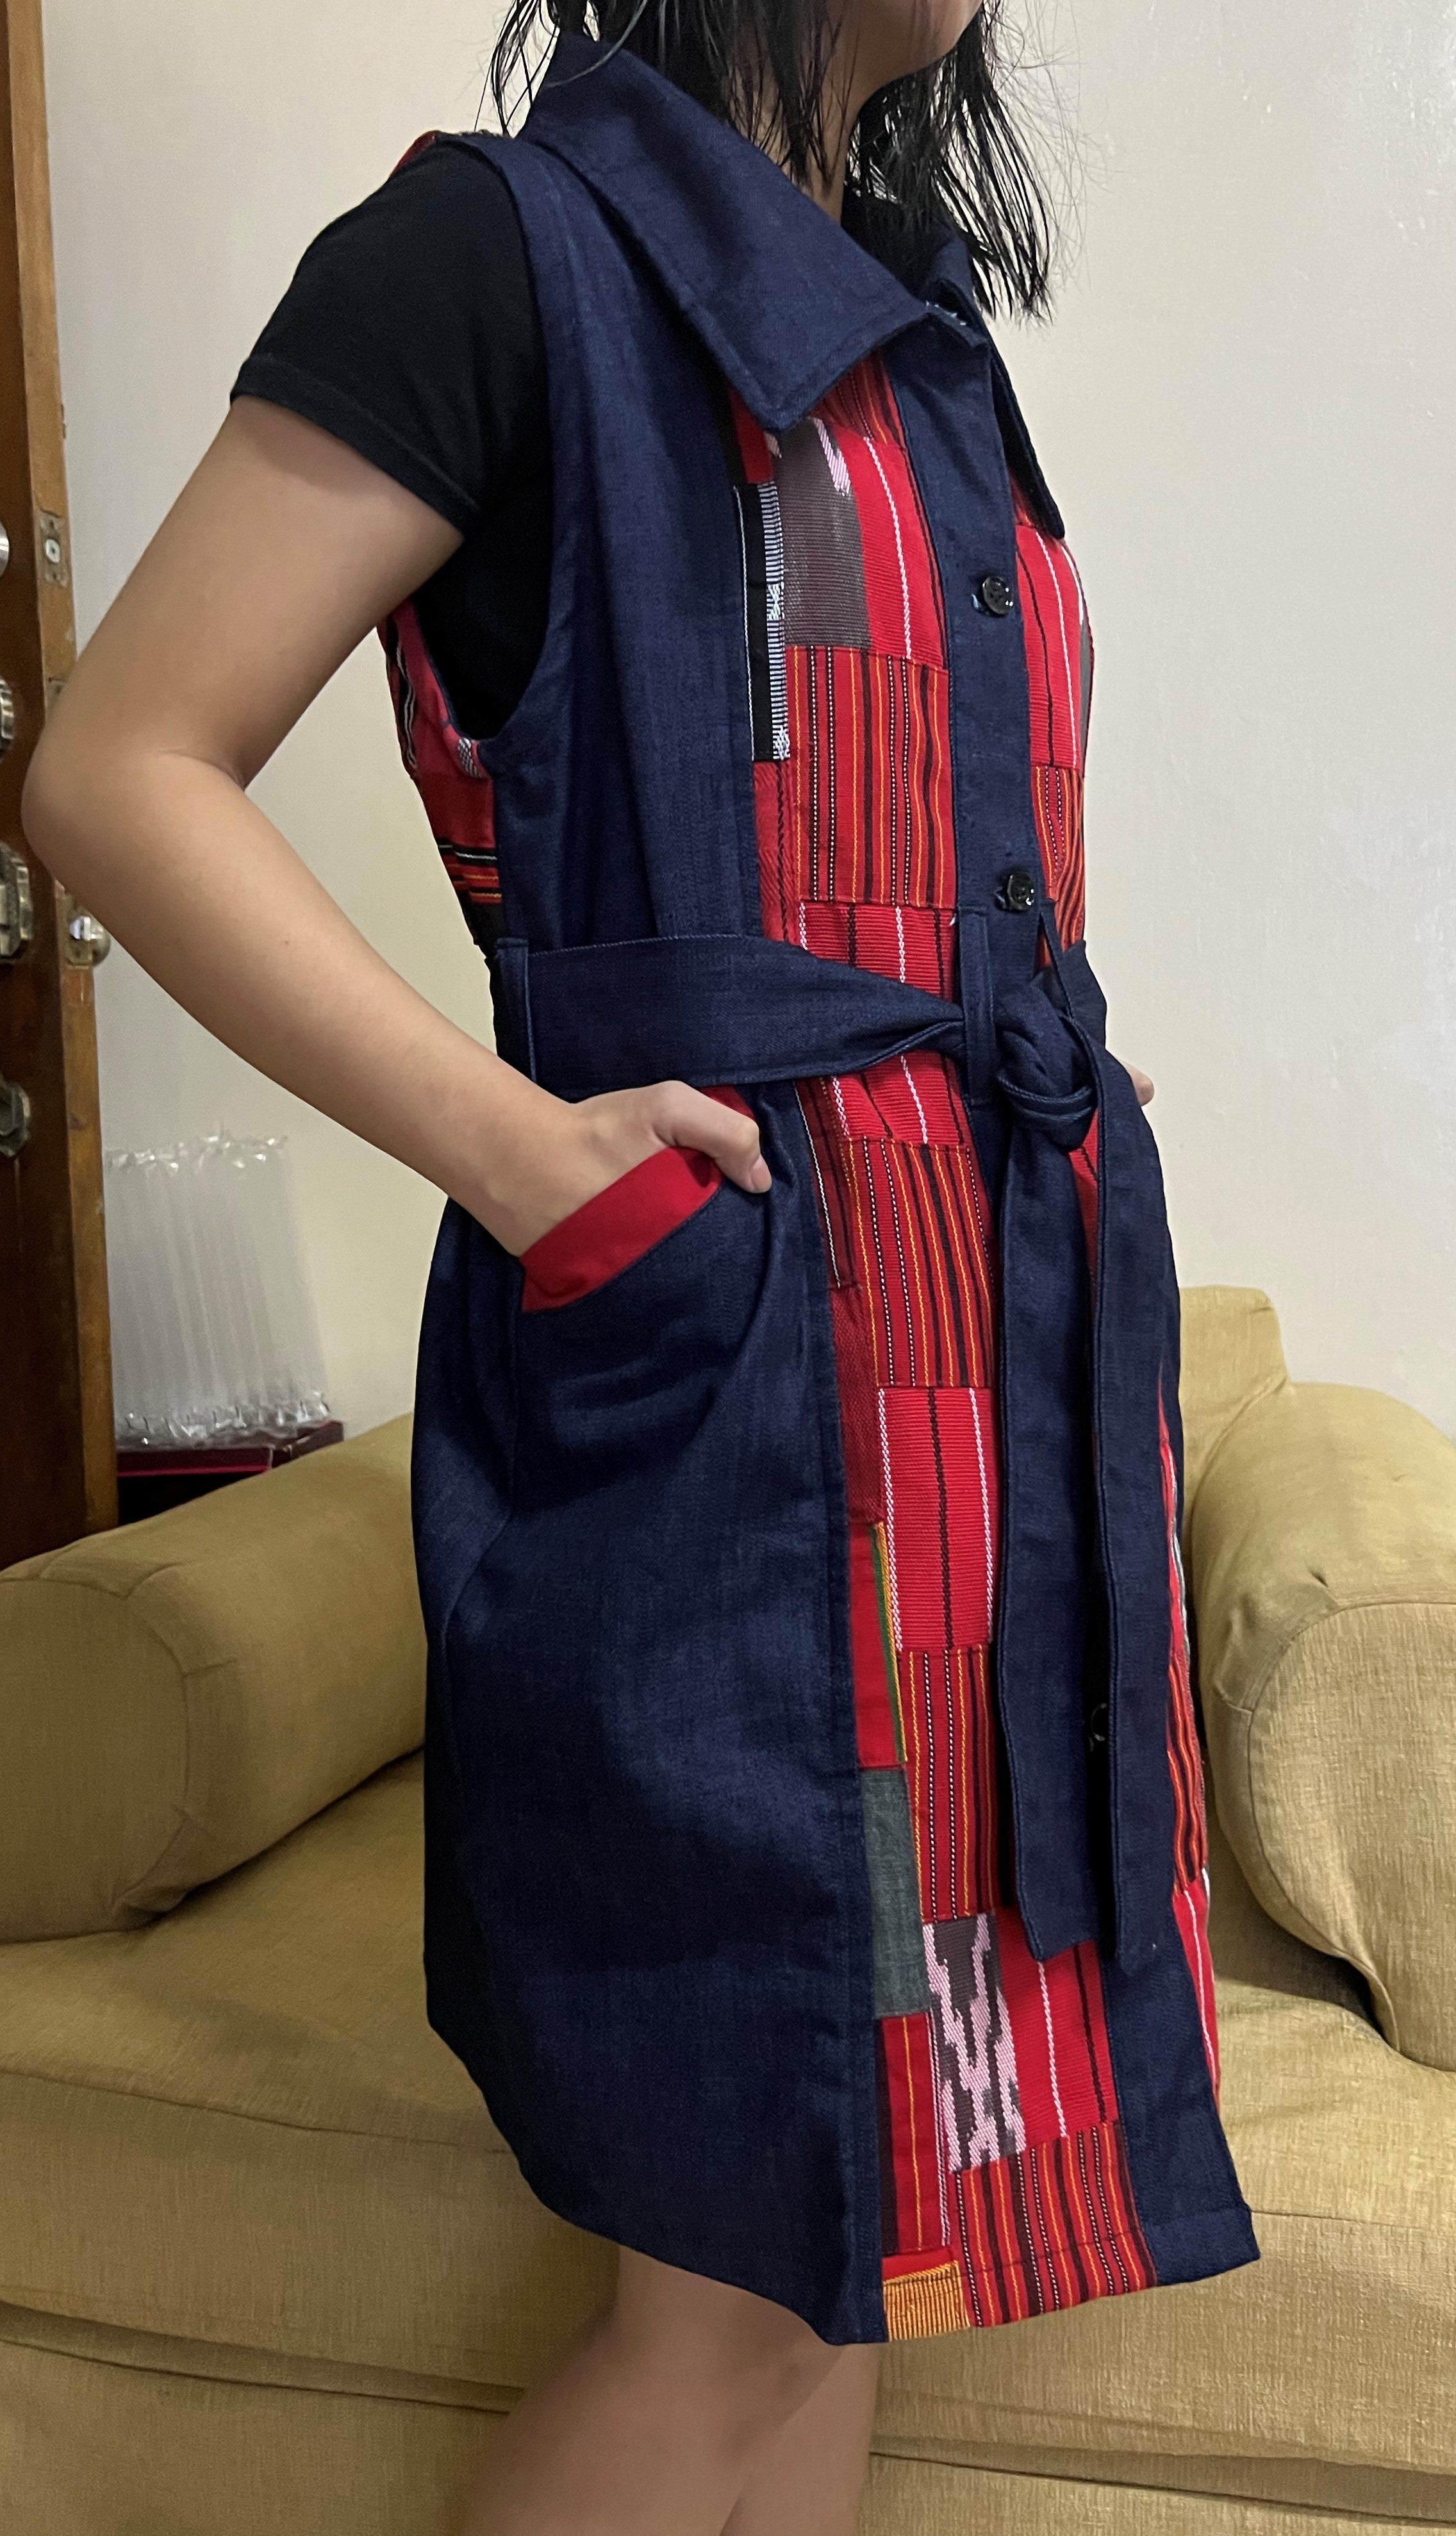 Denim Dress in Inabol Patches